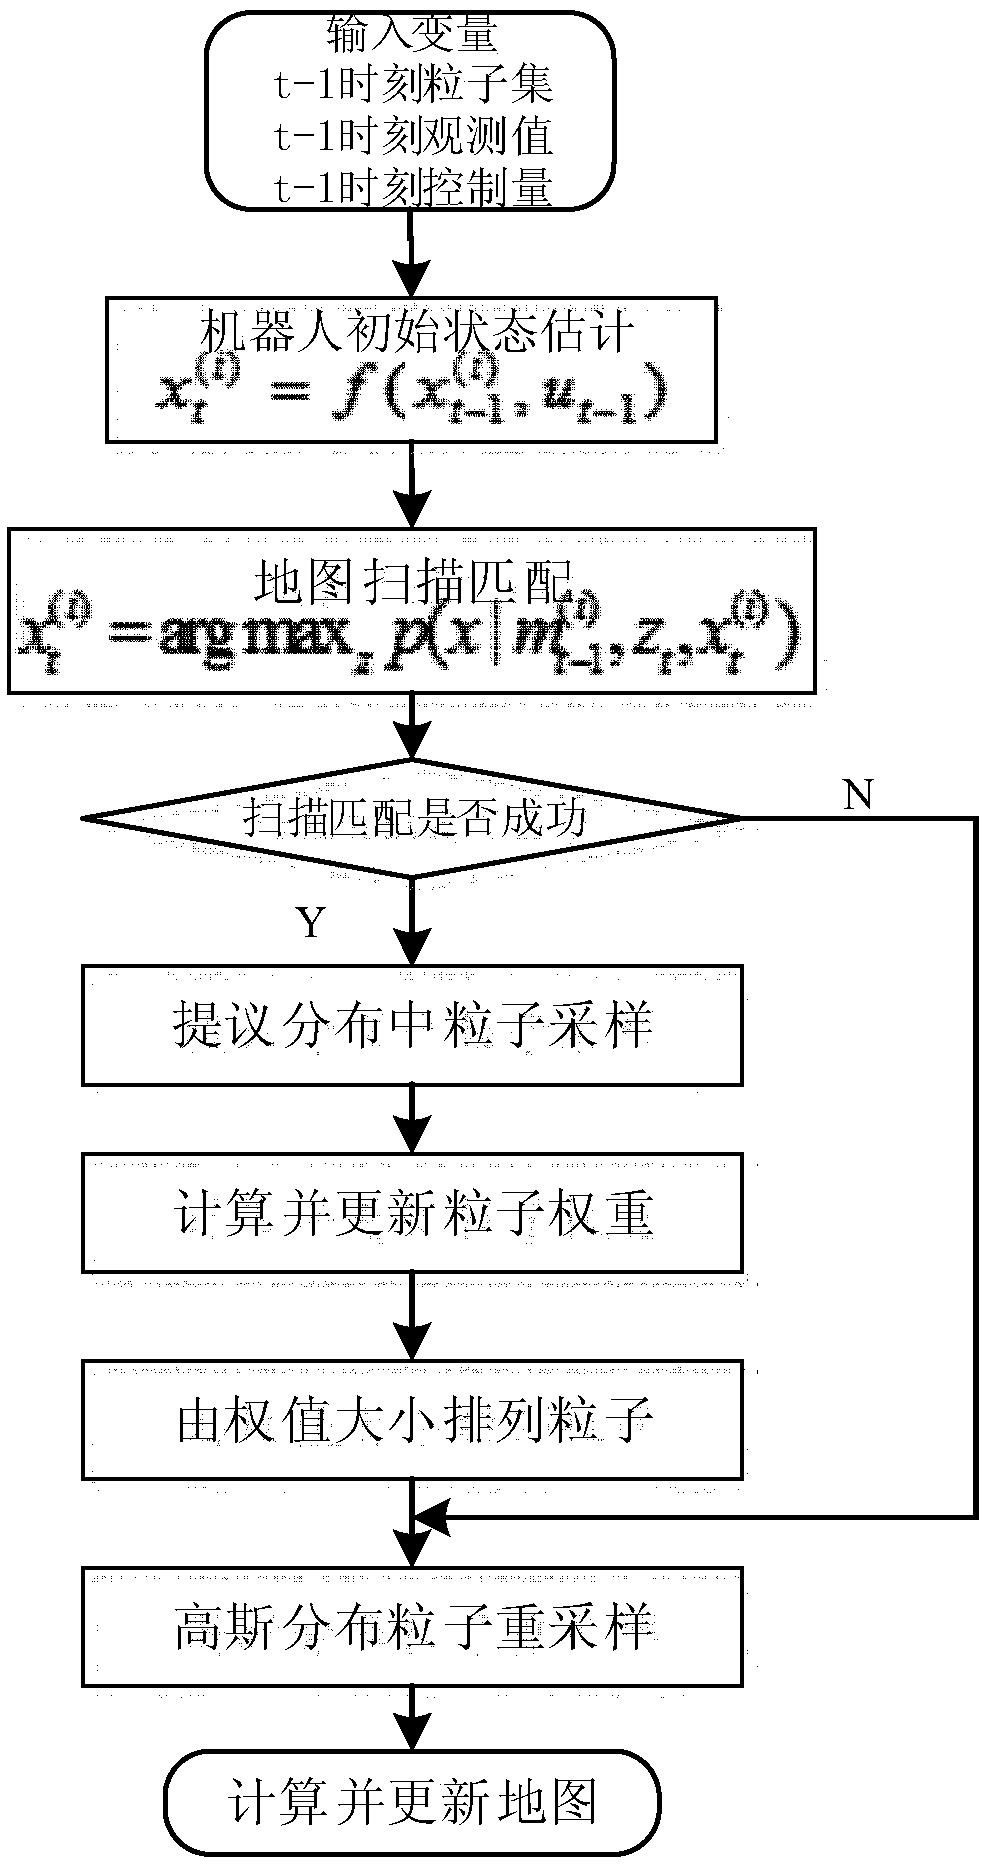 Gaussian distribution based mobile robot simultaneous localization and mapping method